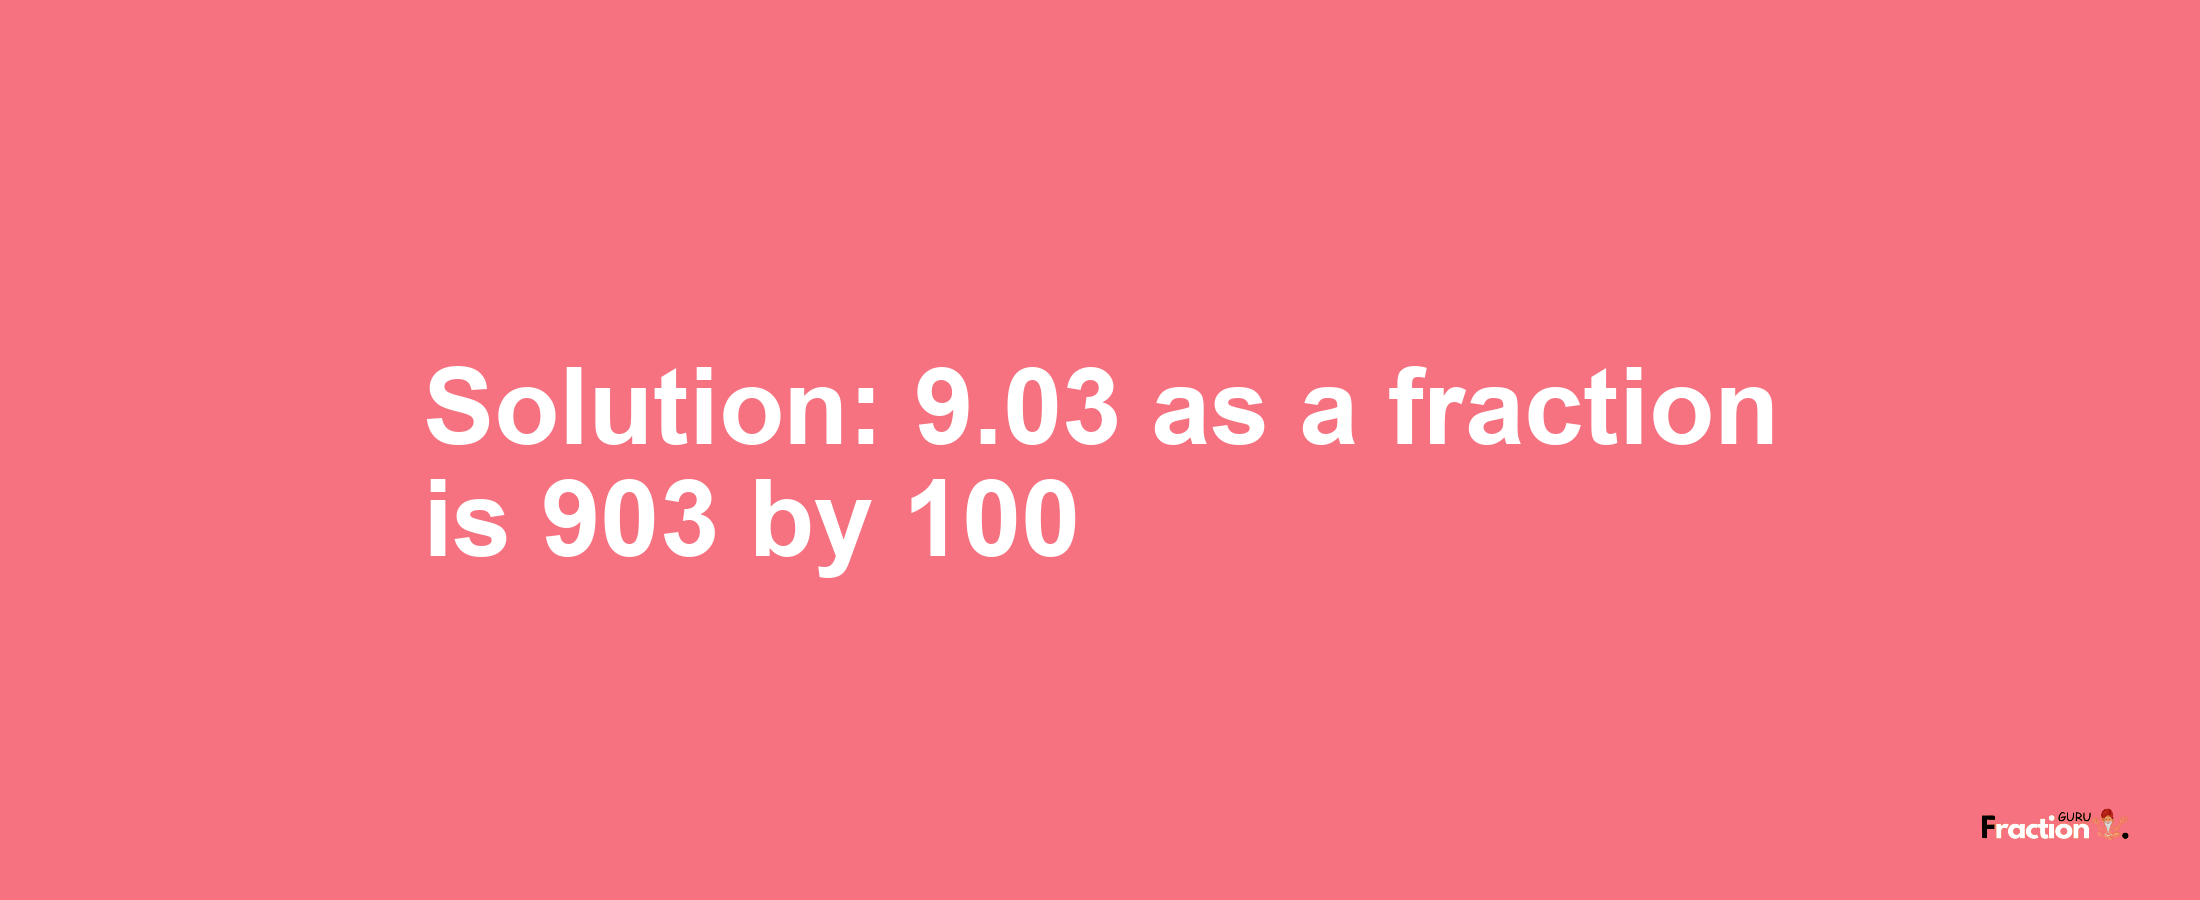 Solution:9.03 as a fraction is 903/100